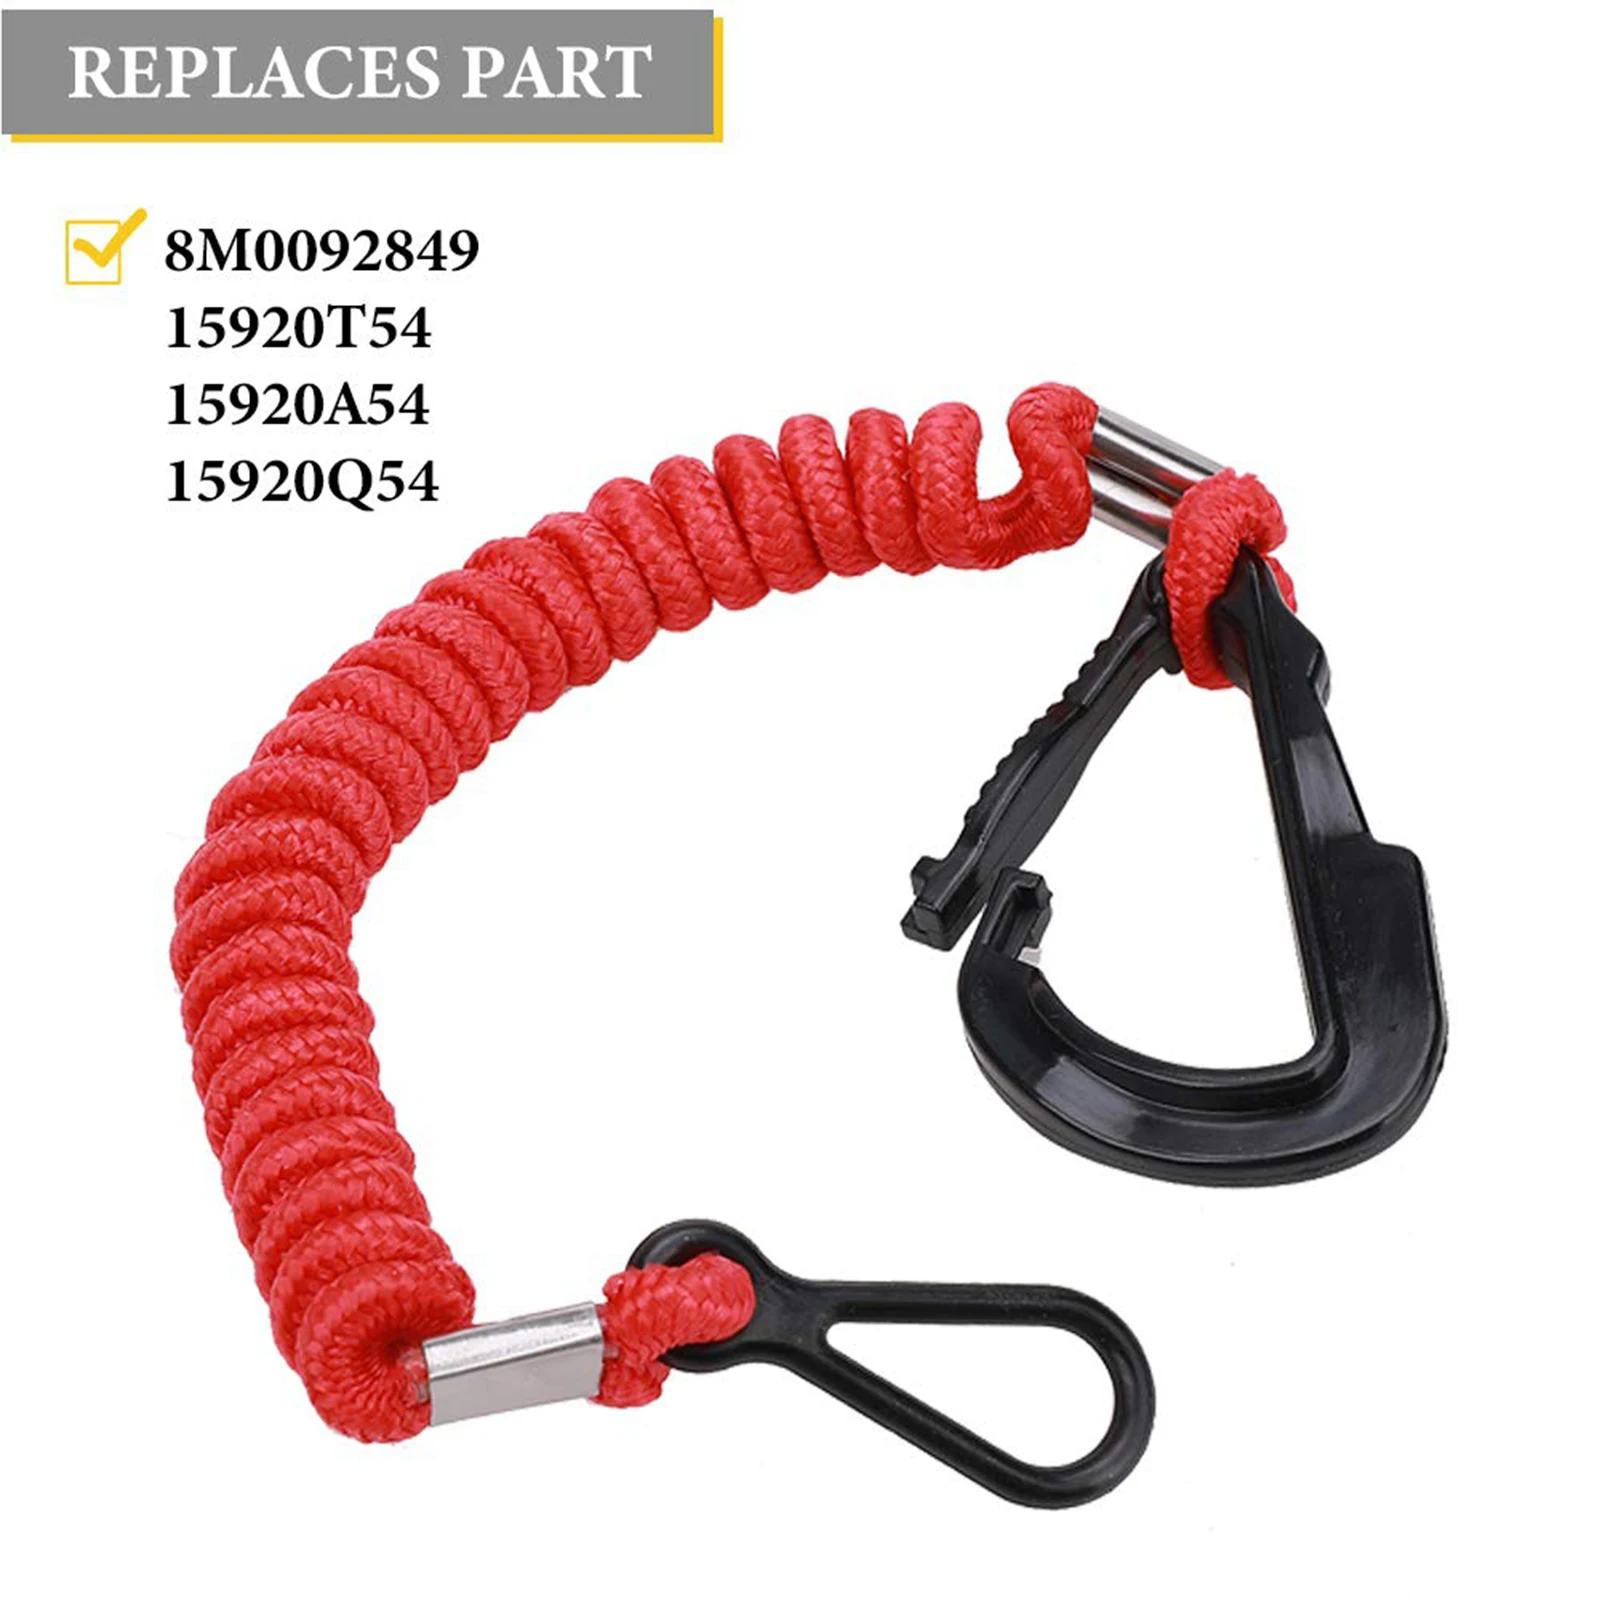 Details about   Outboard Safety Lanyard Cord 15920T54 15920A54 for Mercury Mercruiser Engine 